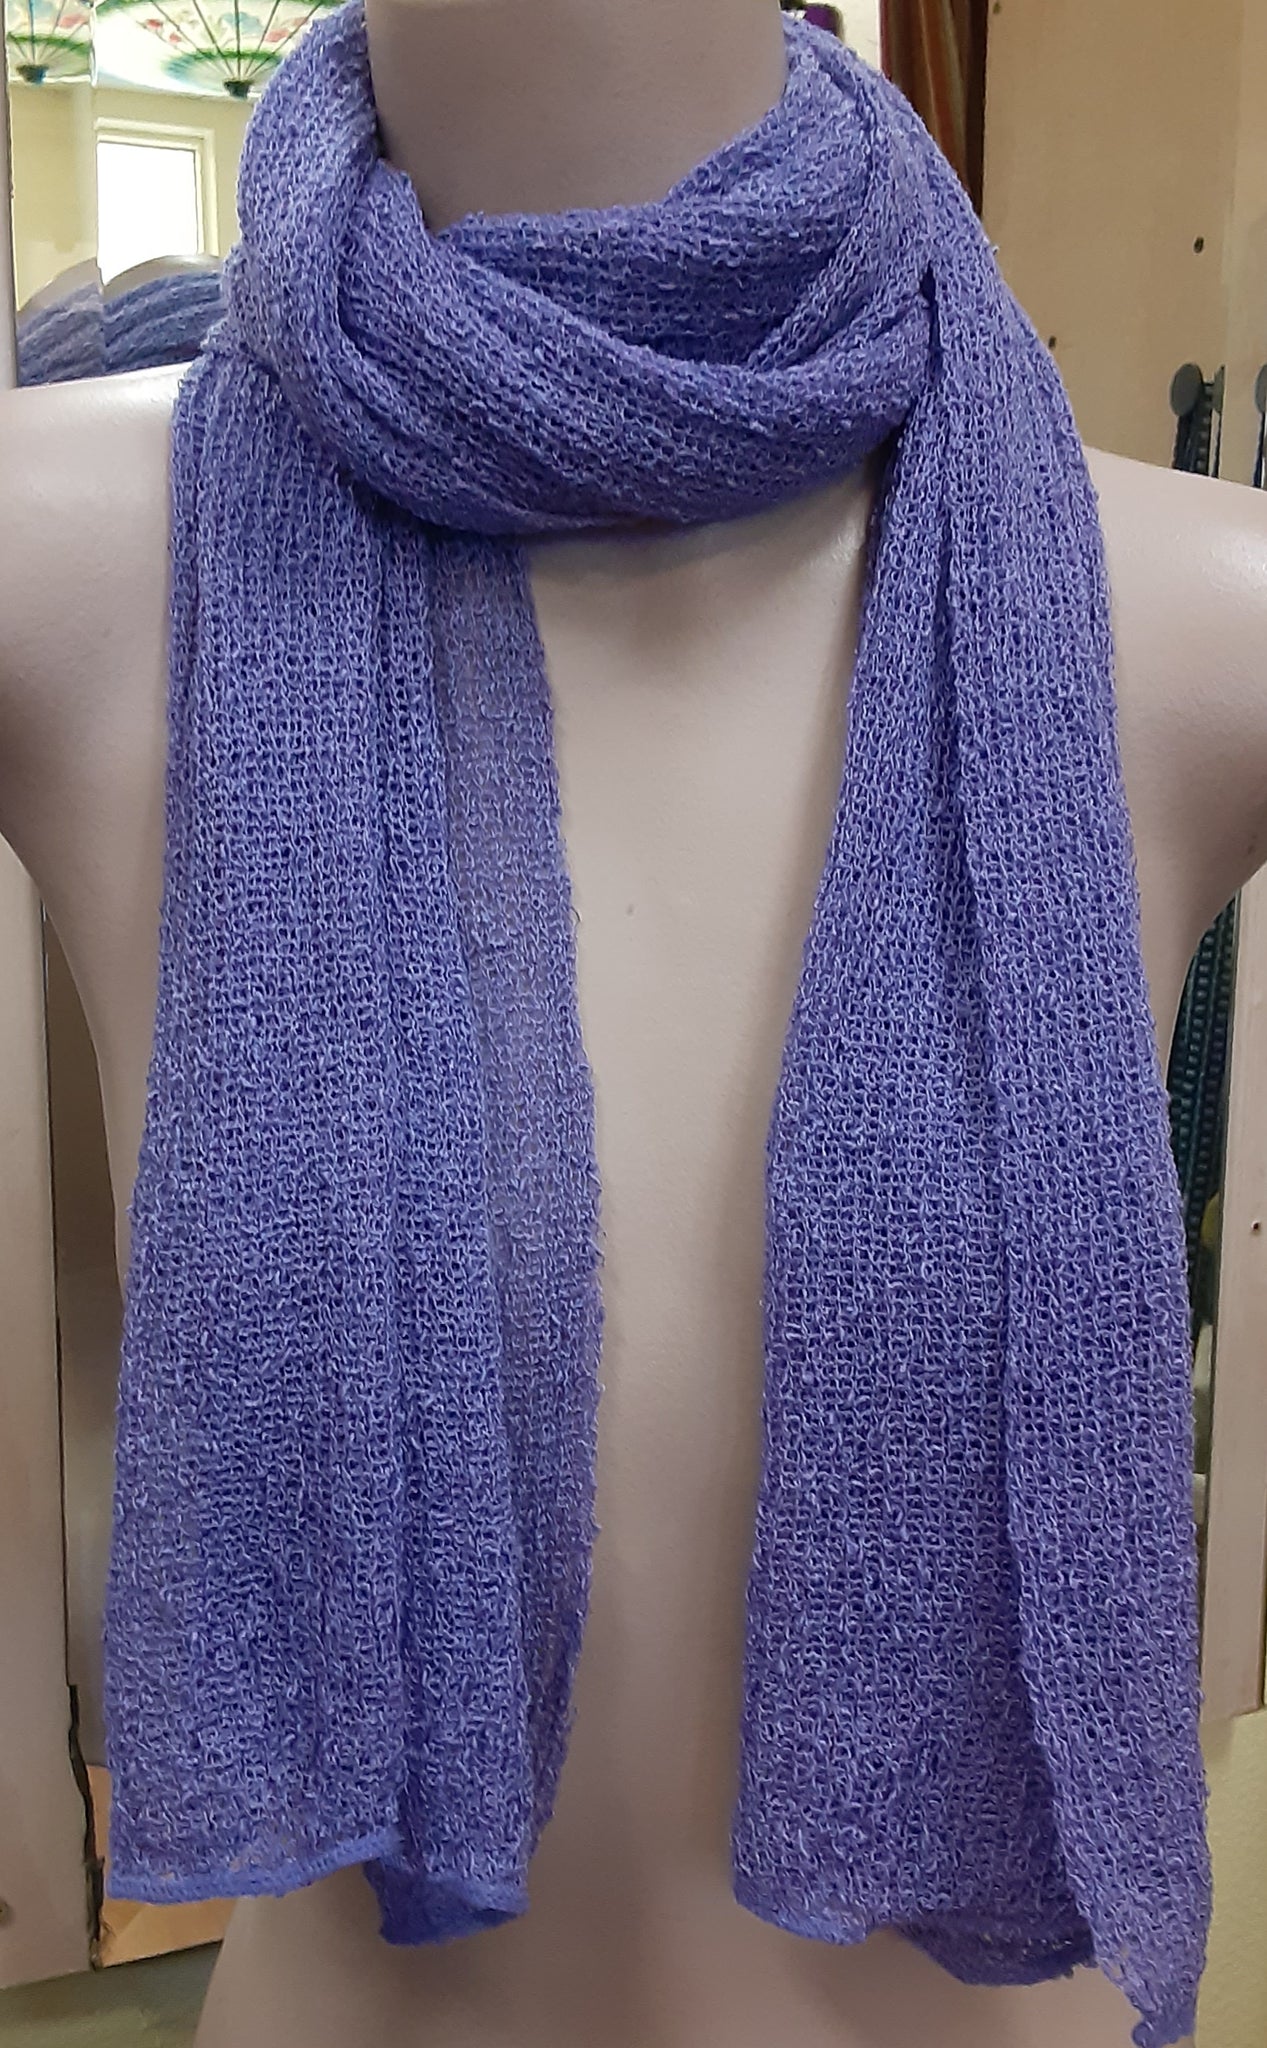 Nubby Knit Scarf - Periwinkle